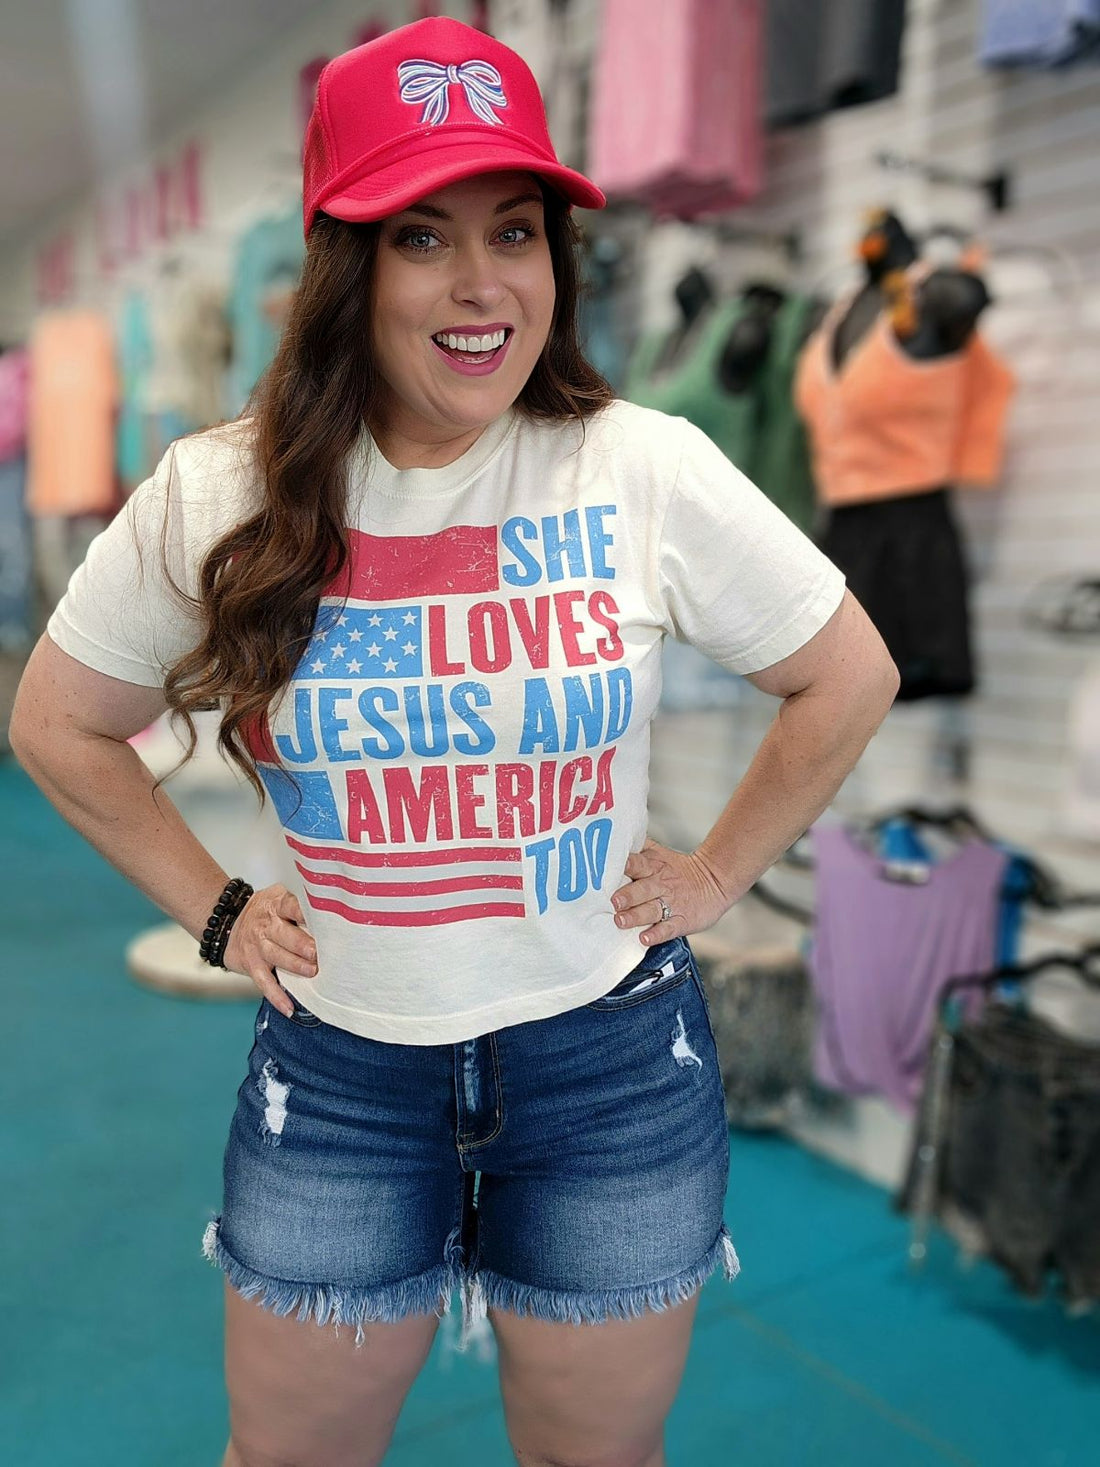 She loves Jesus and America too